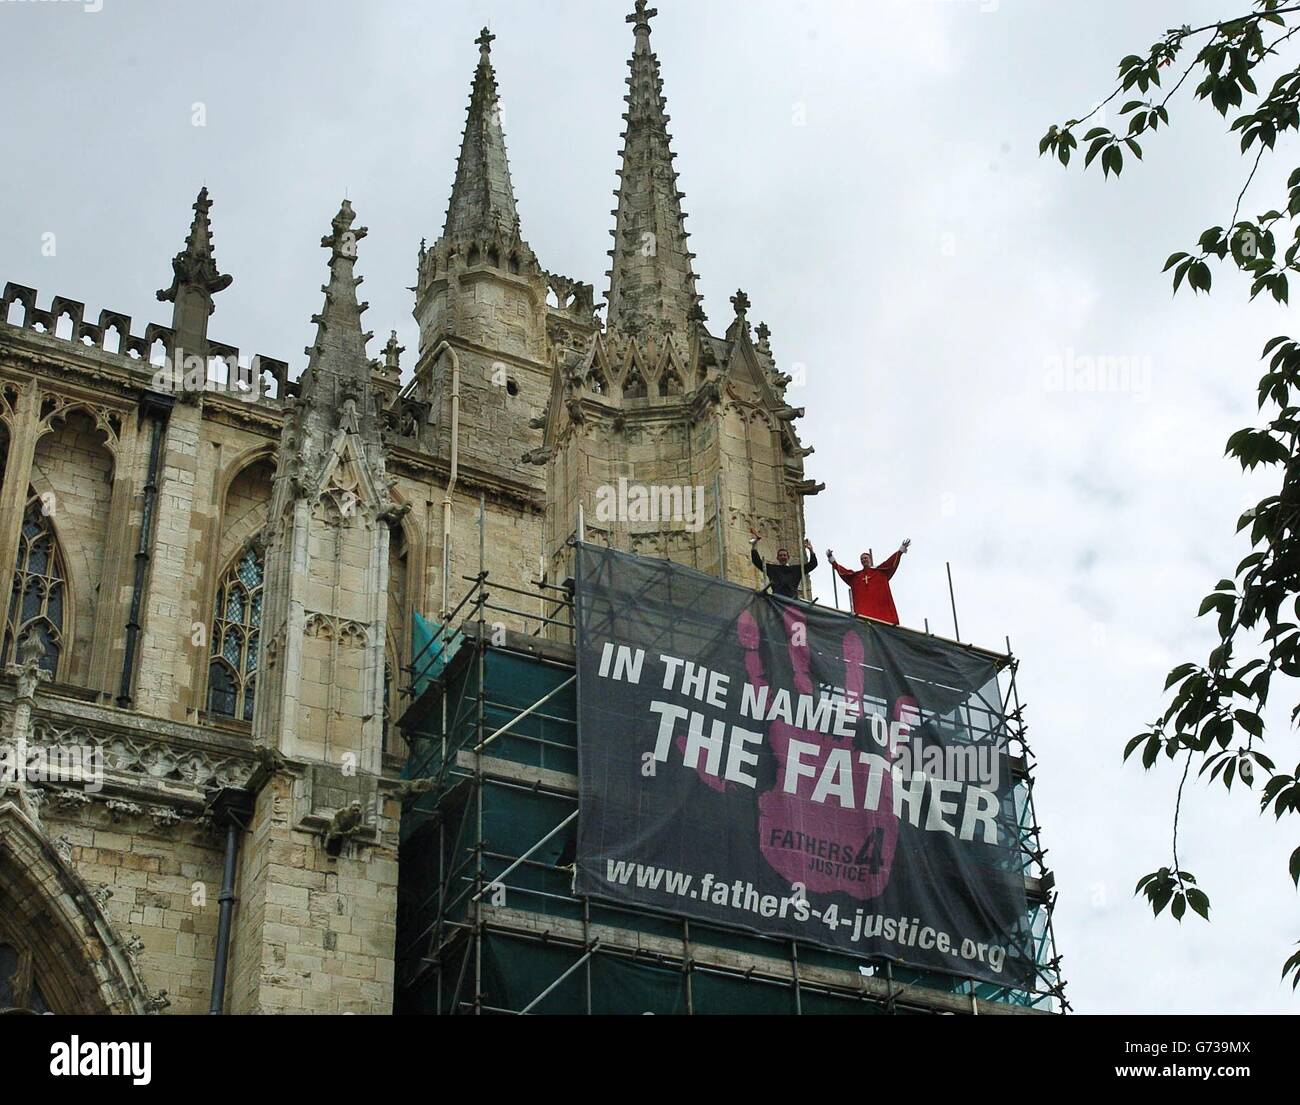 Fathers 4 Justice protest about the Church's failure to take the lead in lobbying the Government over fathers' who have no legal access to their children at York Minster where they disrupted the traditional Sunday service of the Church of England's General Synod. *13/09/04: A man dressed as Batman has climbed on to the Balcony of Buckingham Palace. Stock Photo